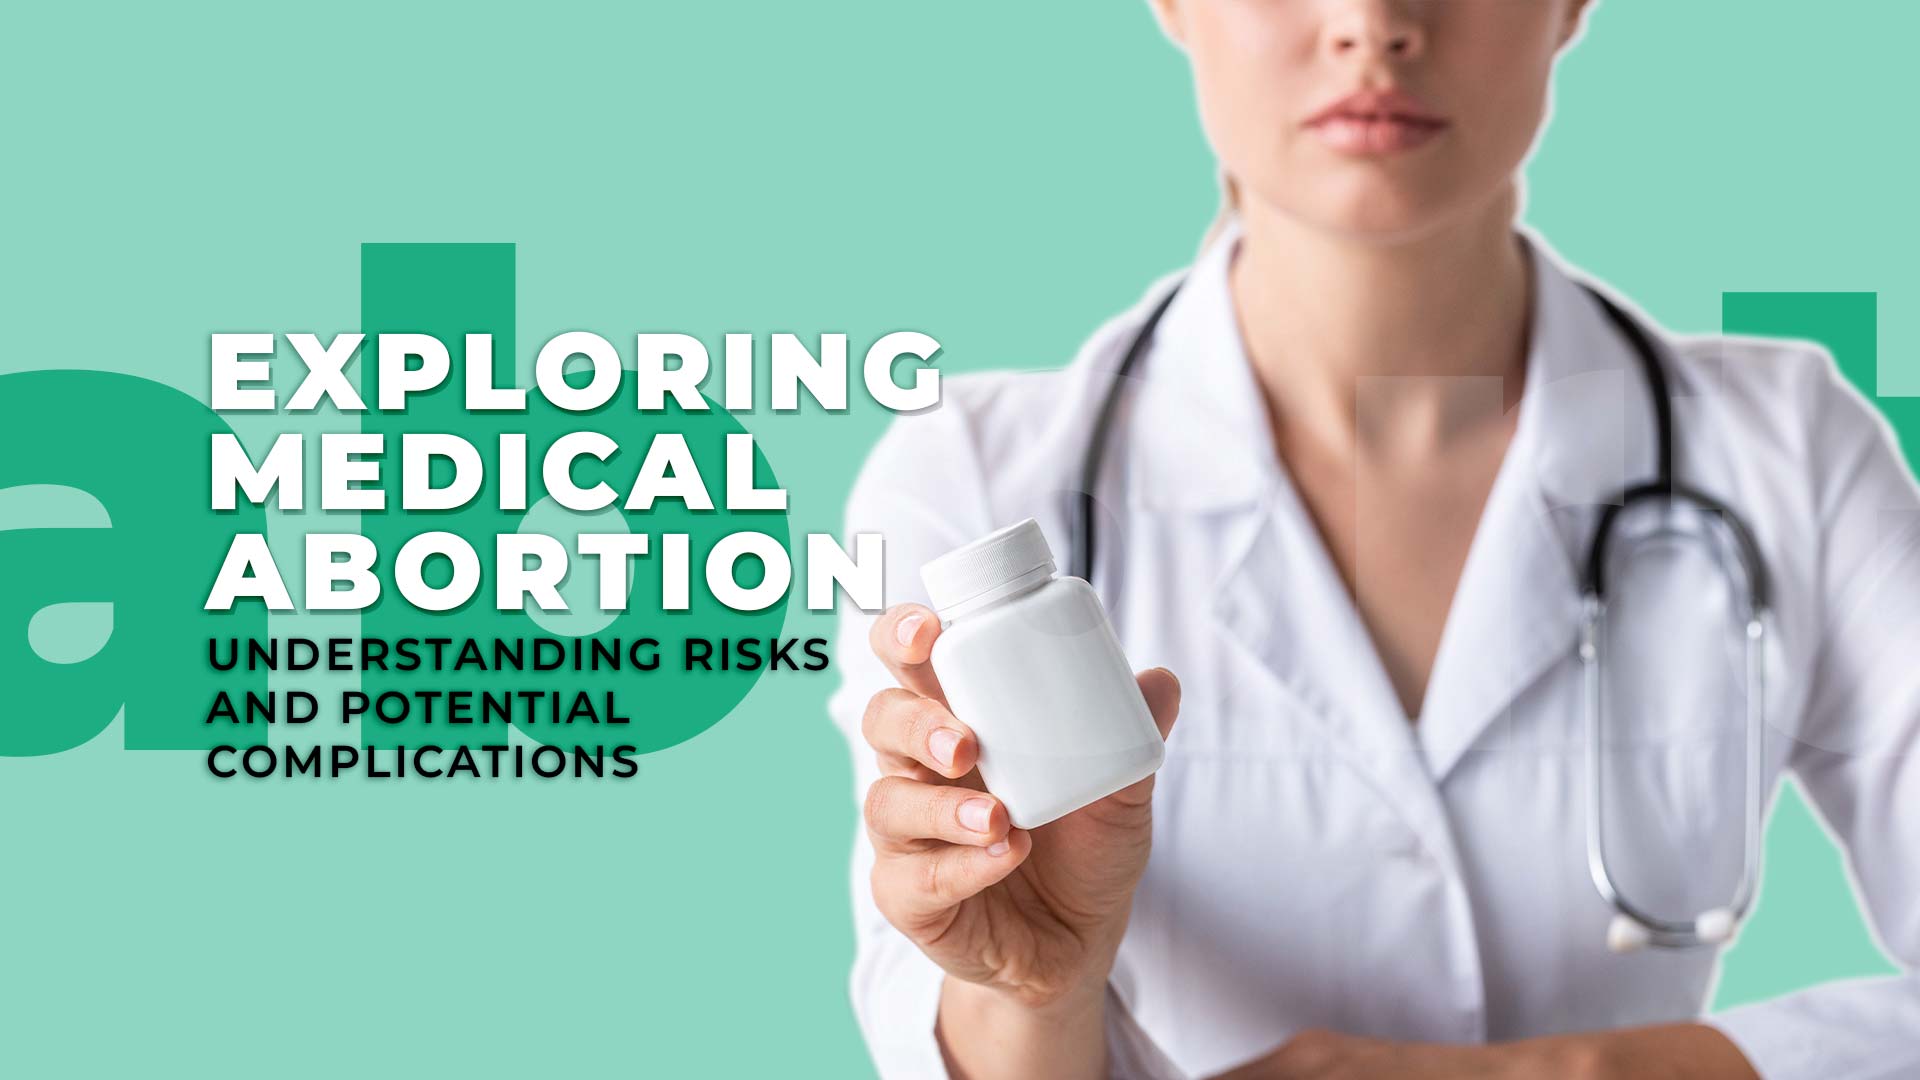 Medical abortion risks and complications